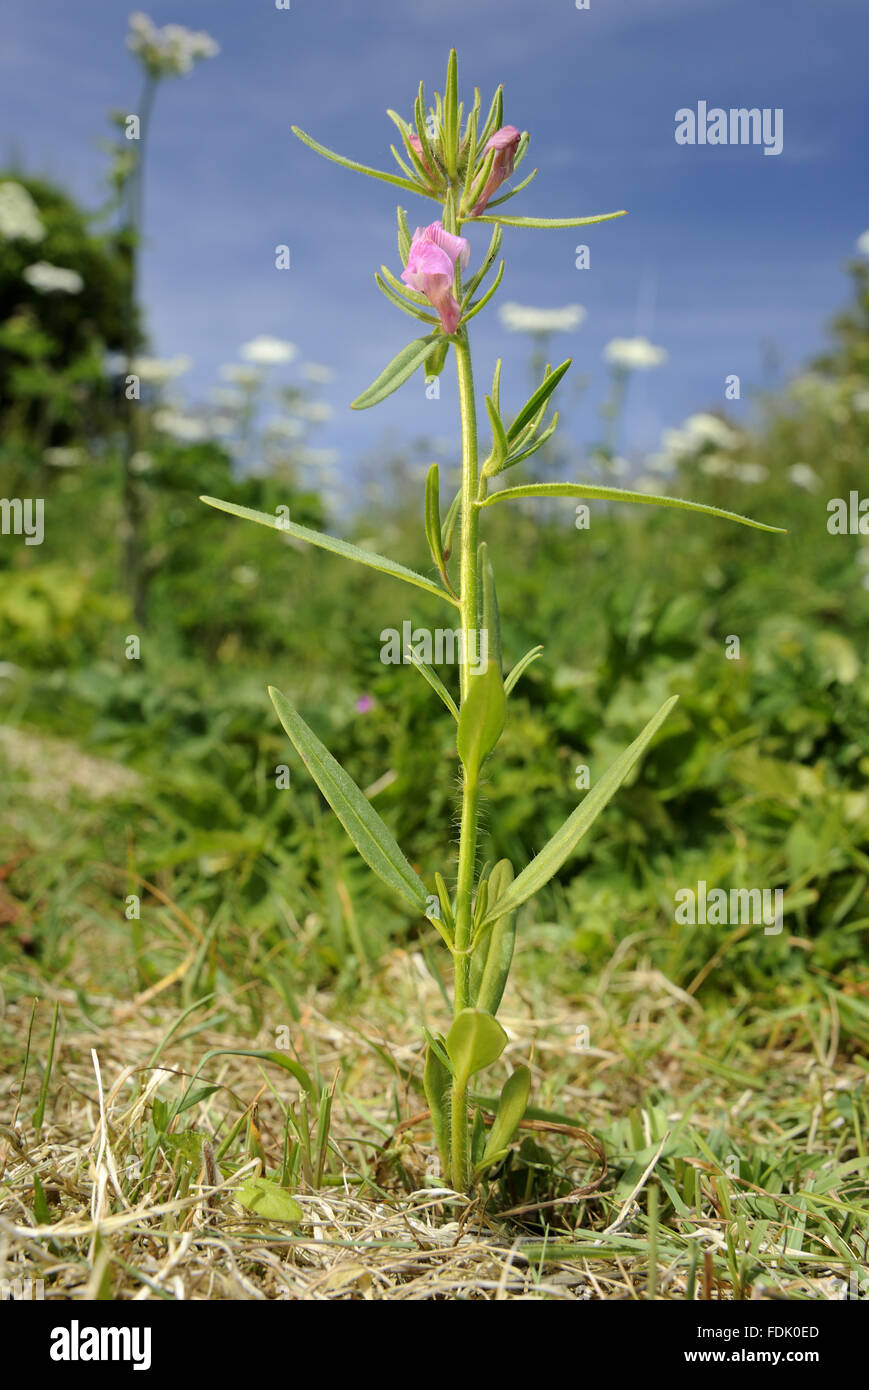 Lesser Snapdragon is an arable plant/weed, native of disturbed ground and farmland. The small pink flower resembles a miniature snapdragon and are followed by a hairy green fruit which is said to resemble a weasel's snout. Also known as 'weasel's snout' o Stock Photo